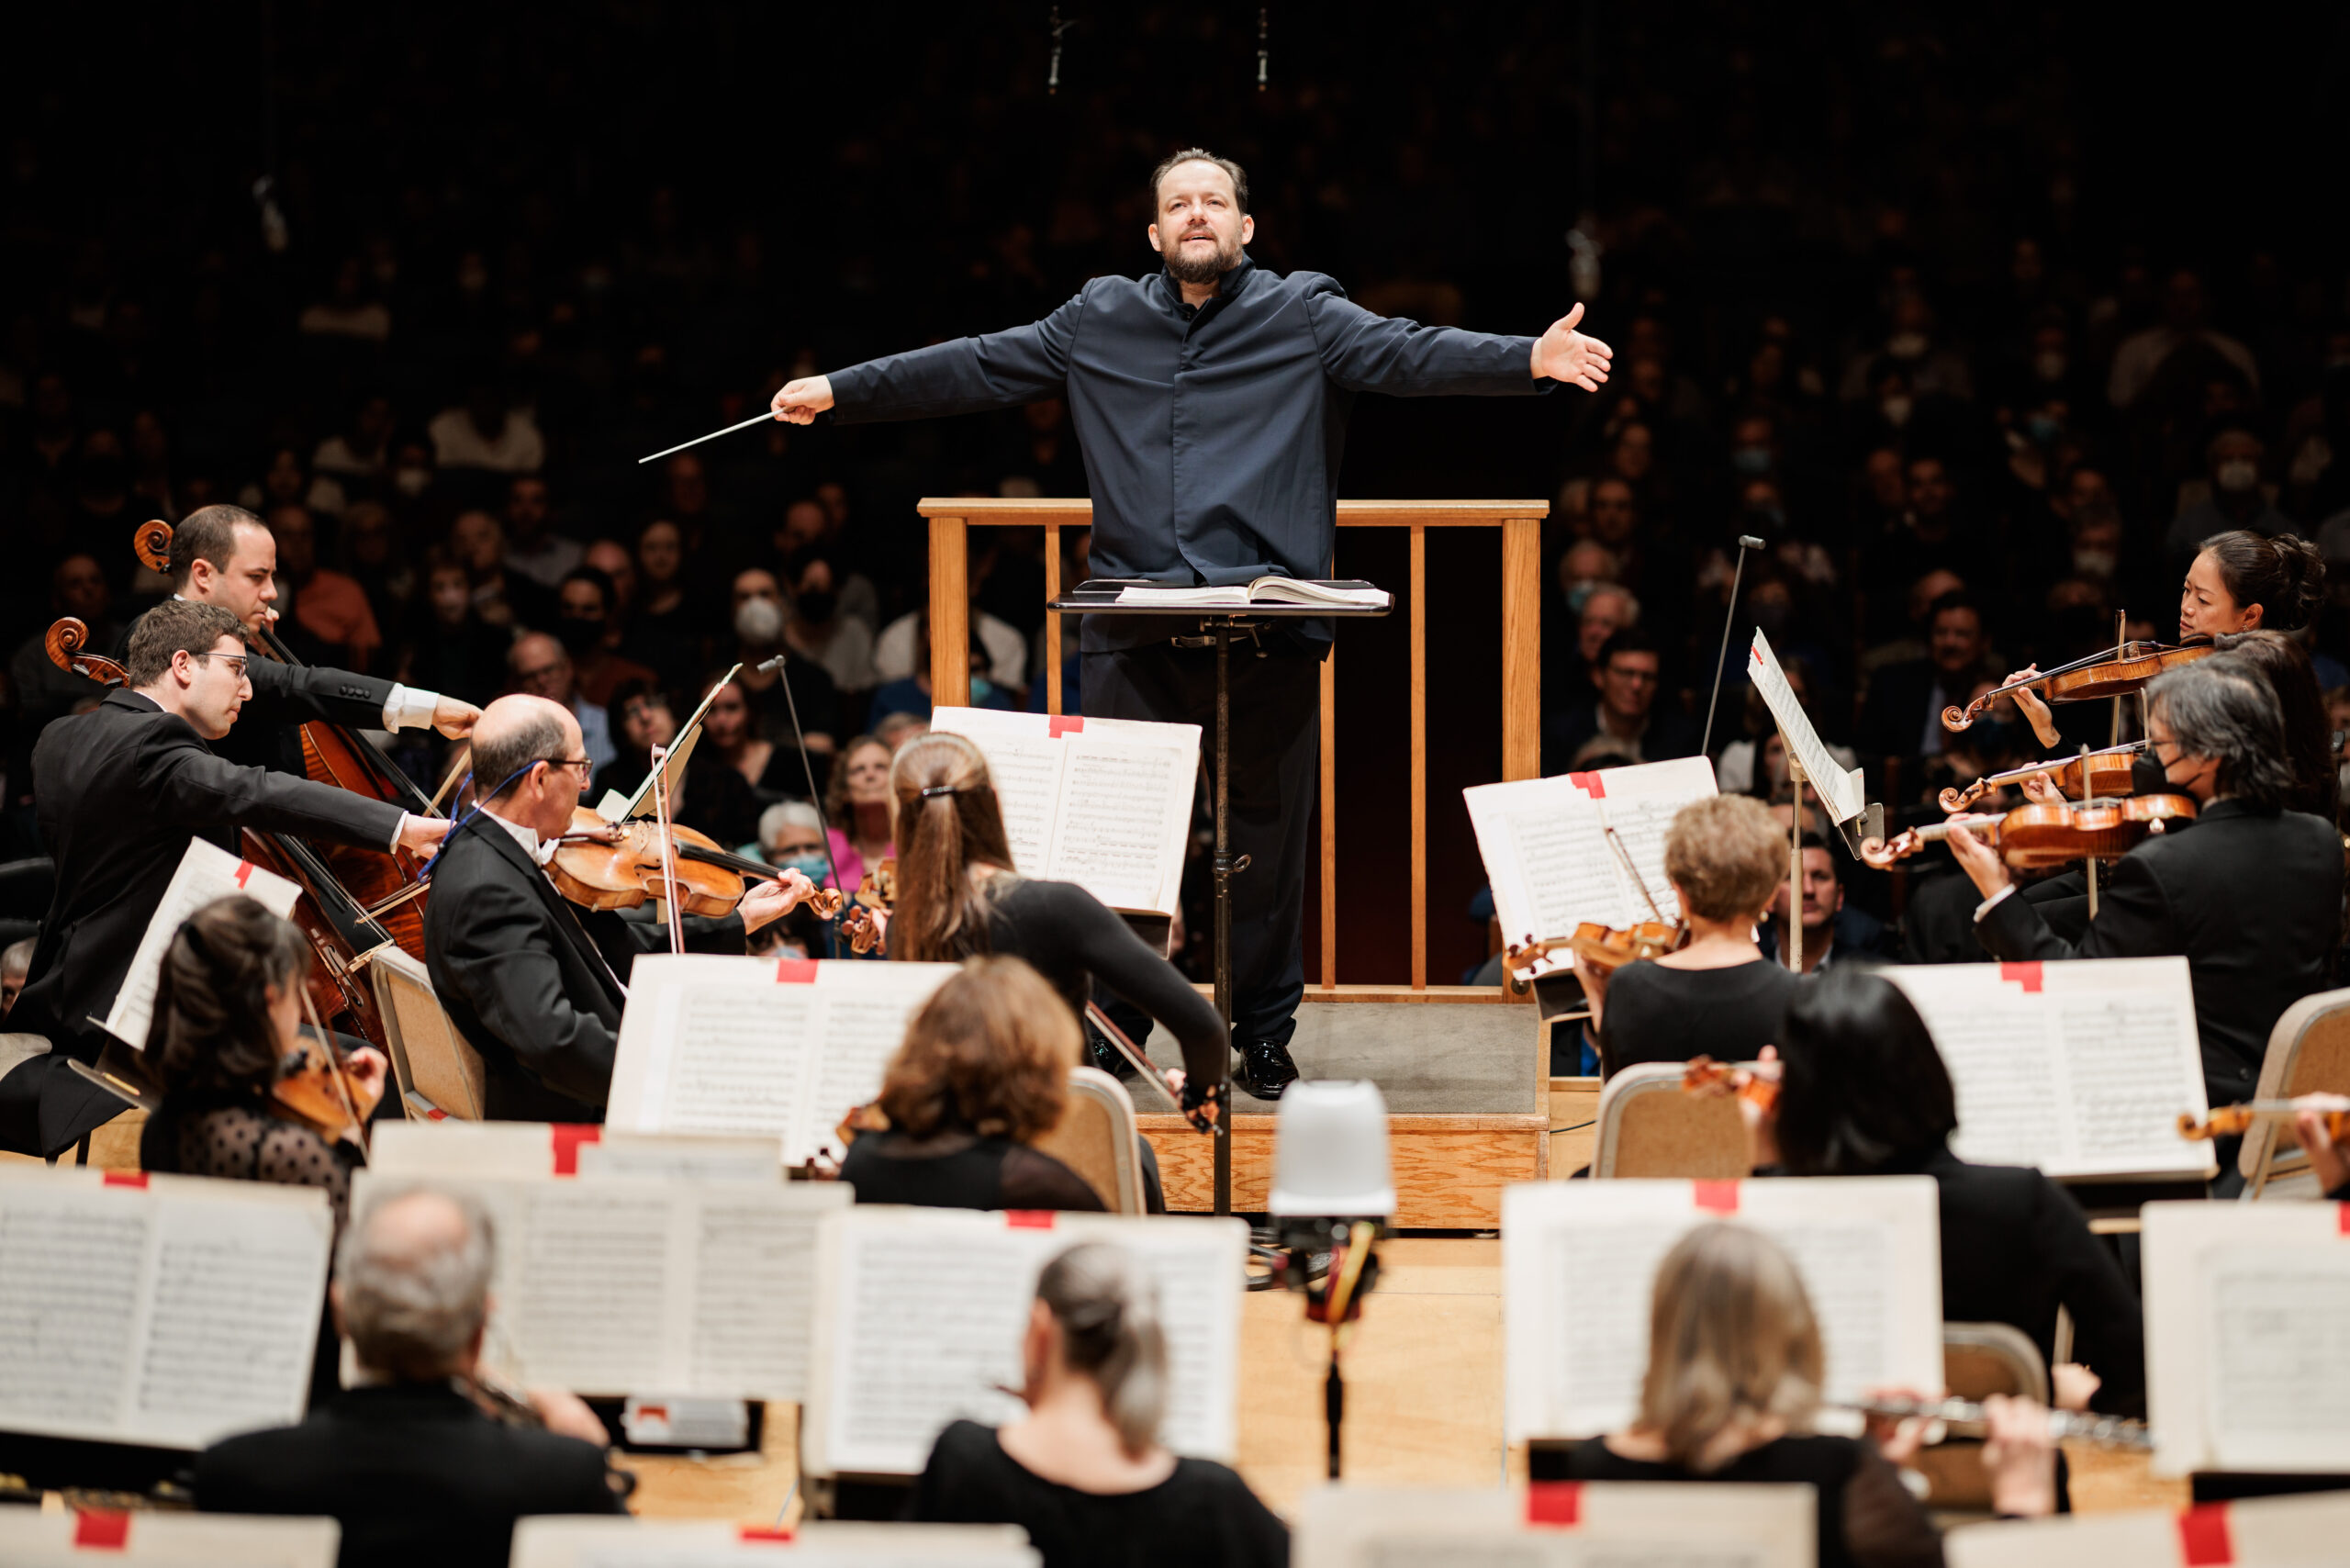 Boston Symphony Orchestra is hosting the “Music for the Senses Festival” in April